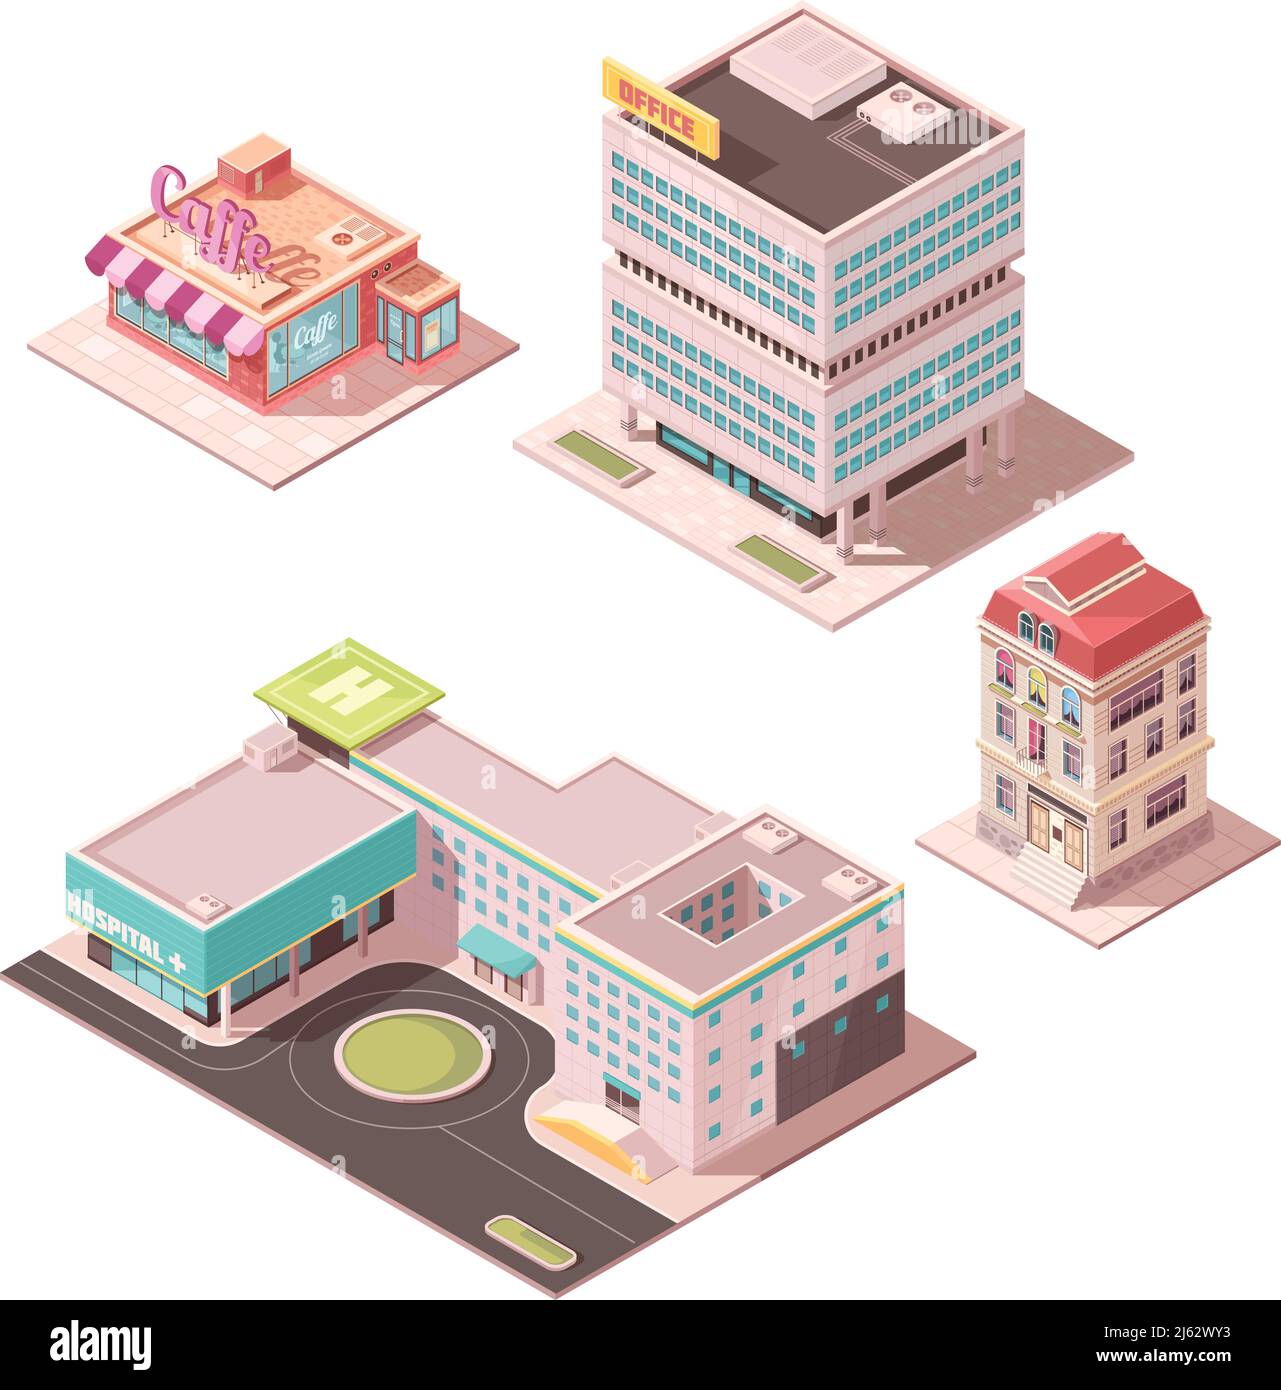 Set of isometric buildings including cafe, office center, residential house, hospital with helicopter pad isolated vector illustration Stock Vector